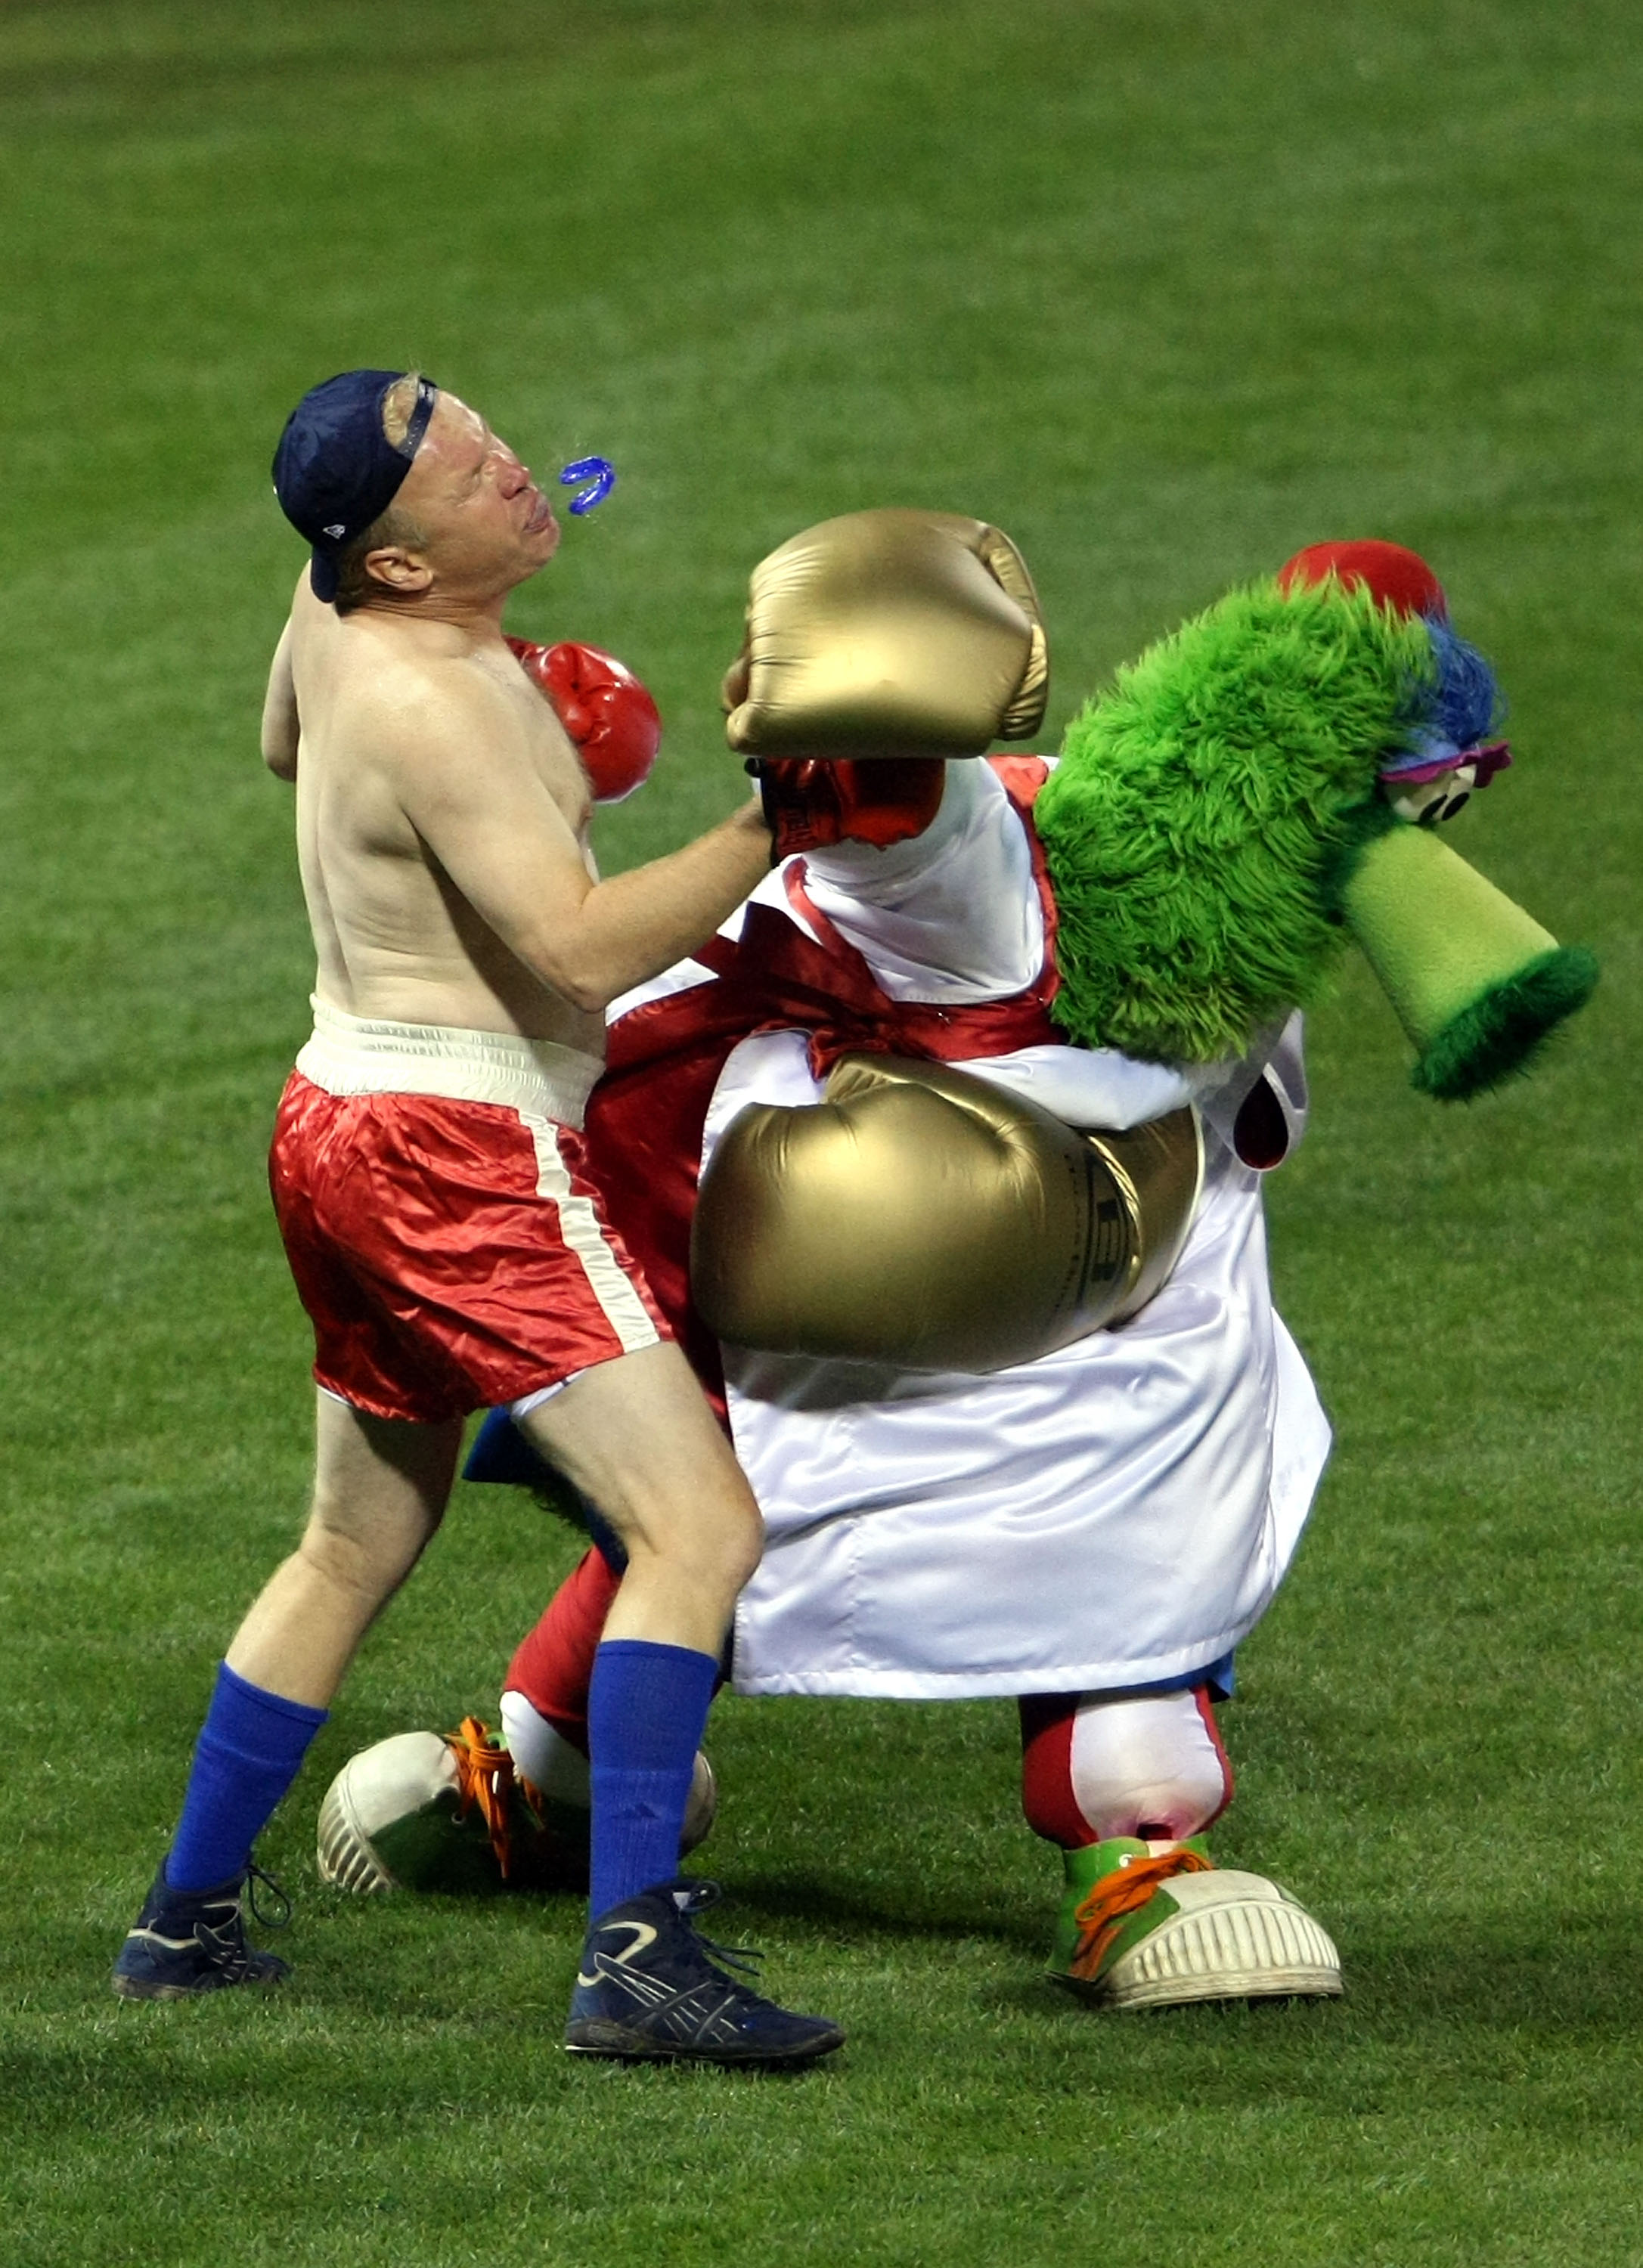 PHILADELPHIA - NOVEMBER 01:  The Philly Phanatic, mascot of the Philadelphia Phillies performs against the New York Yankees in Game Four of the 2009 MLB World Series at Citizens Bank Park on November 1, 2009 in Philadelphia, Pennsylvania.  (Photo by Nick